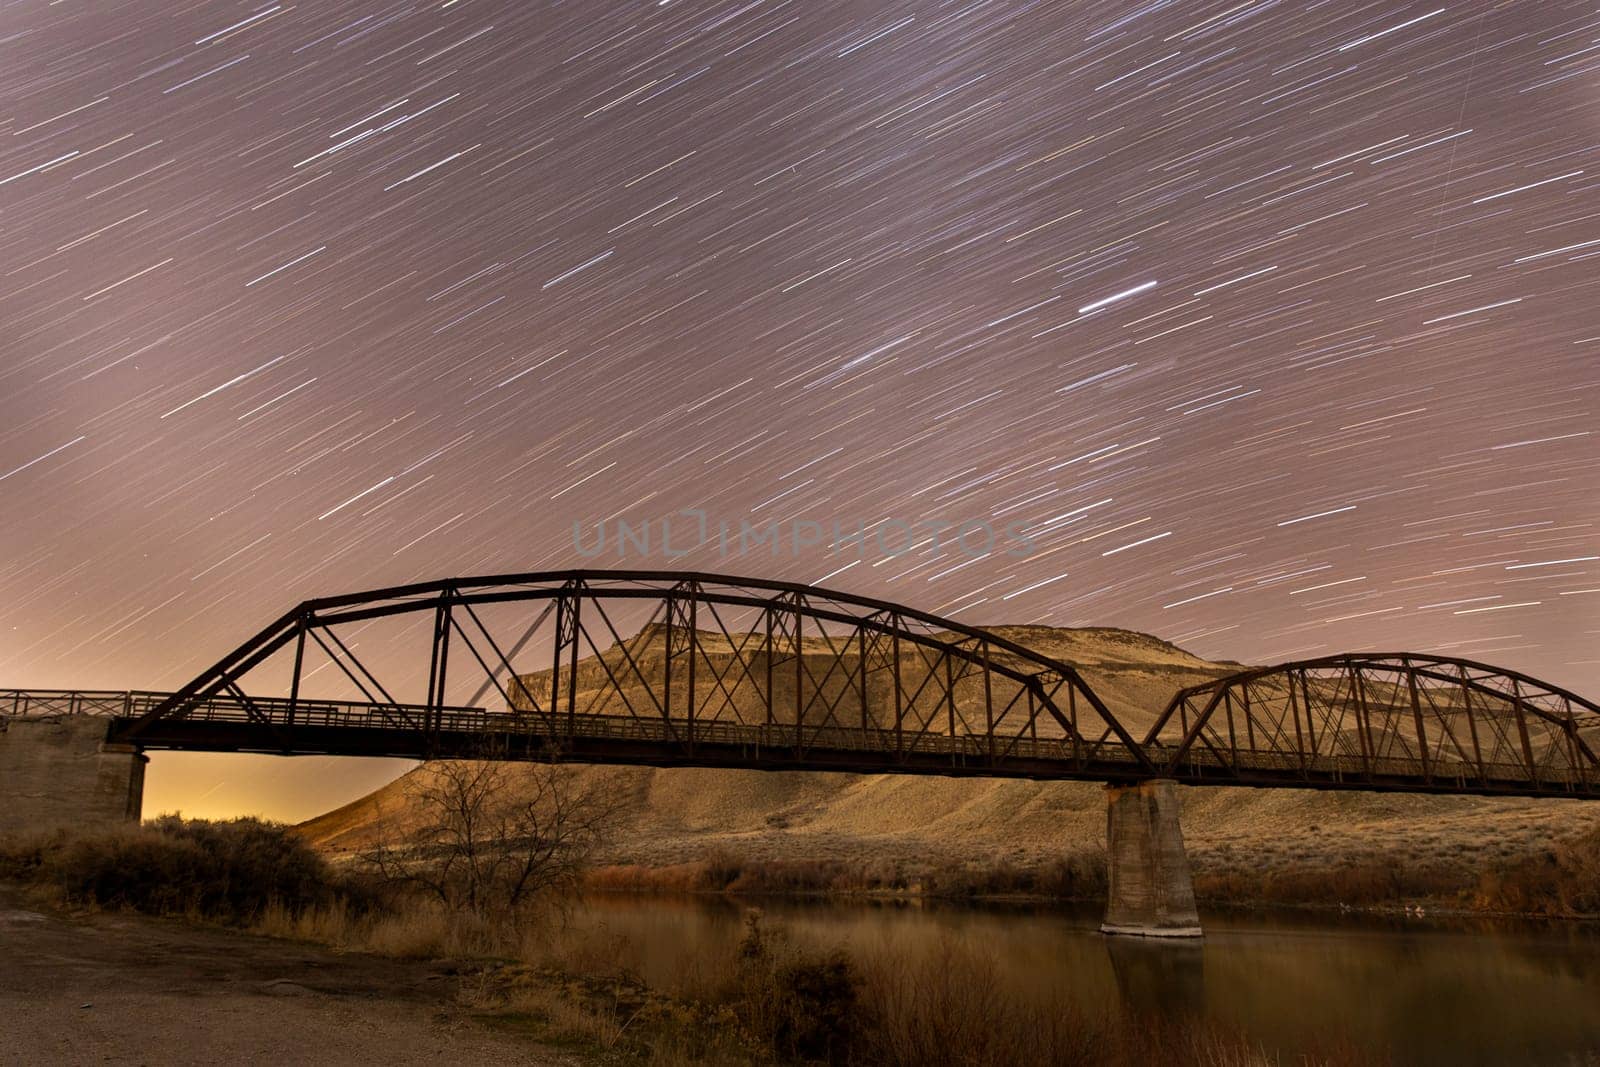 star trails on a bridge with the night sky lit up